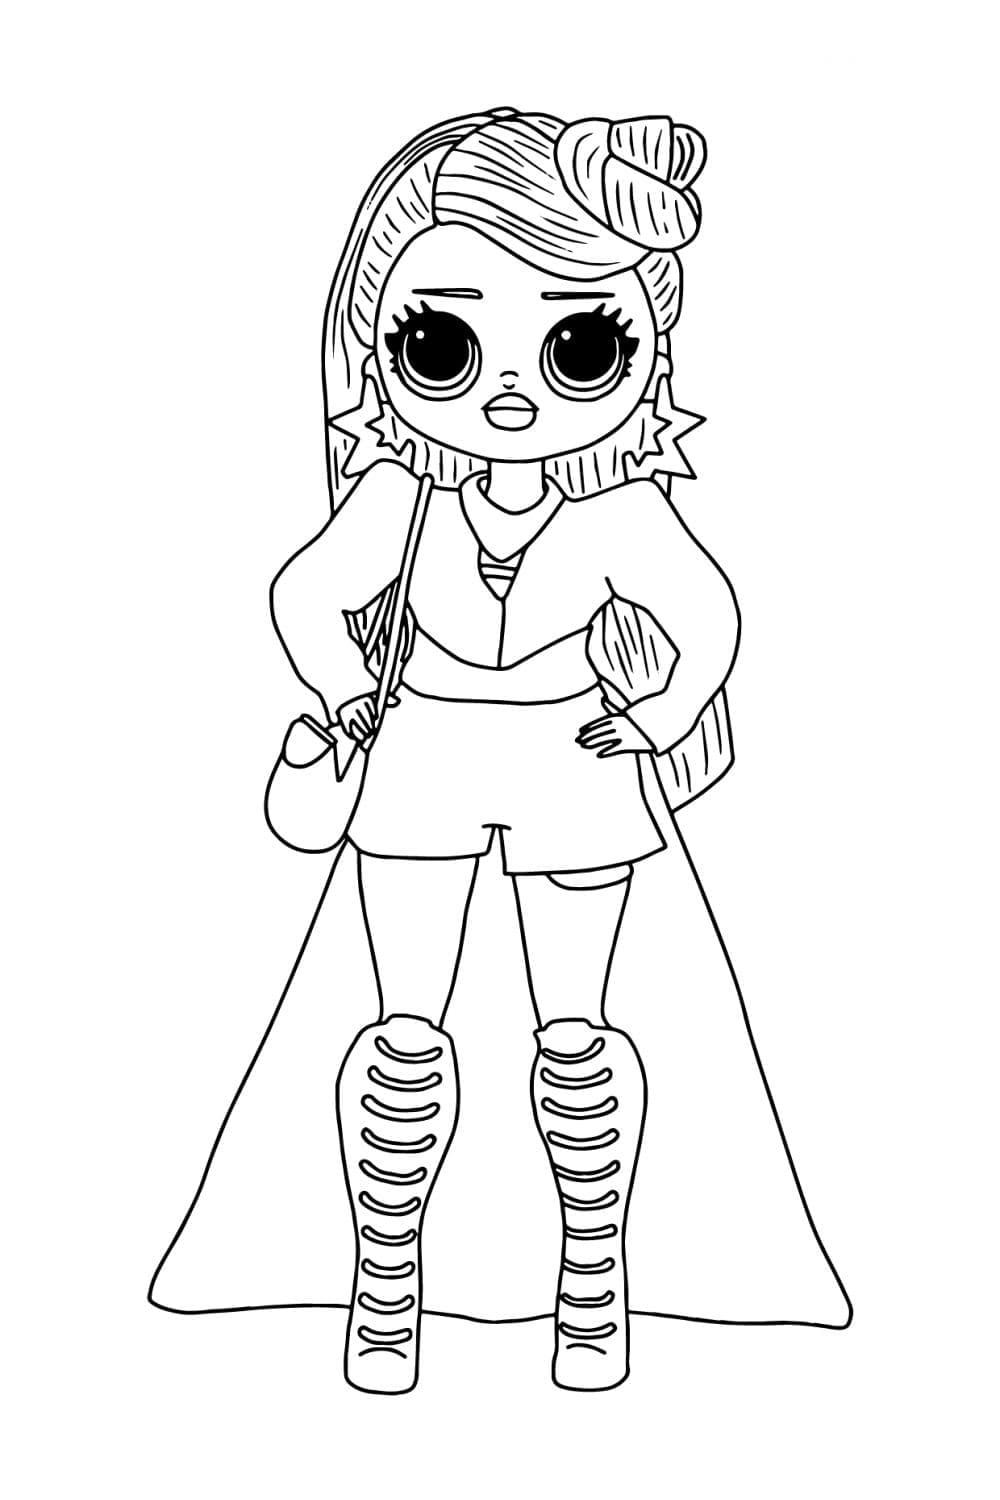 Miss Independence LOL OMG coloring page